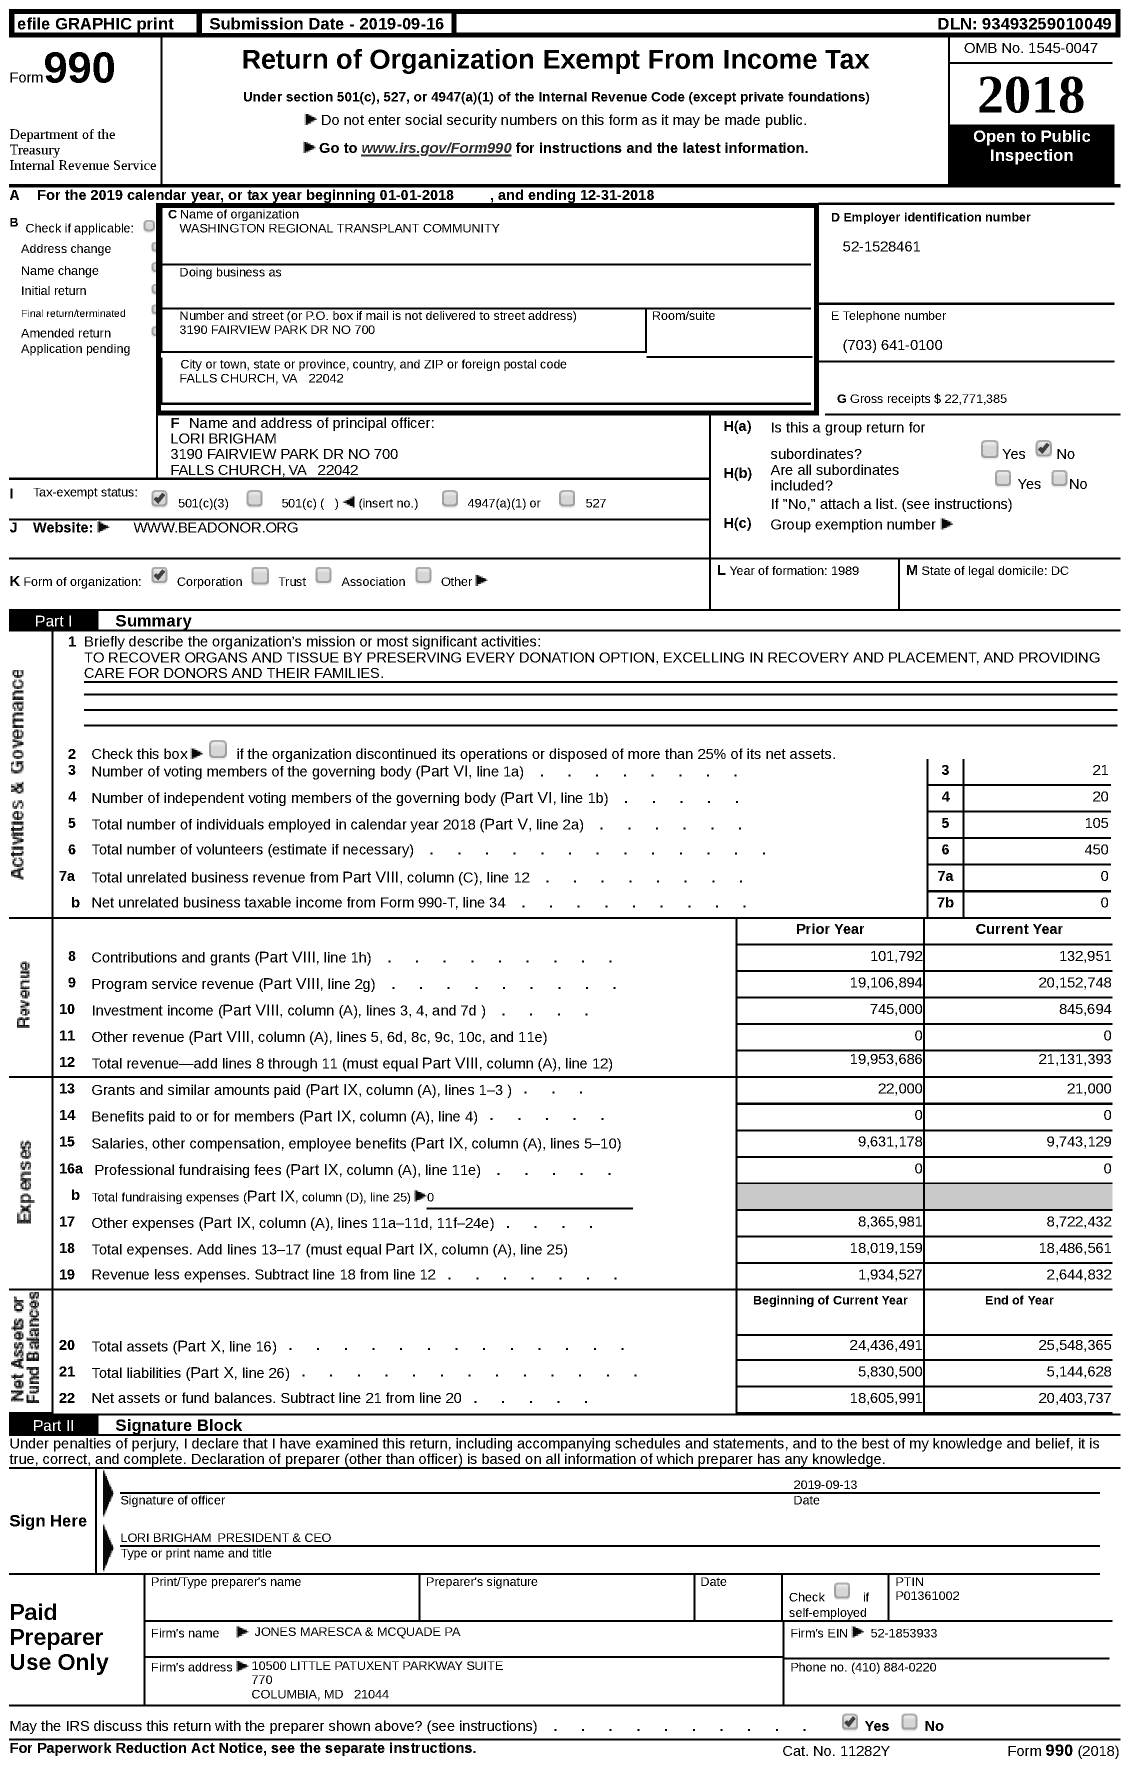 Image of first page of 2018 Form 990 for Washington Regional Transplant Community (WRTC)